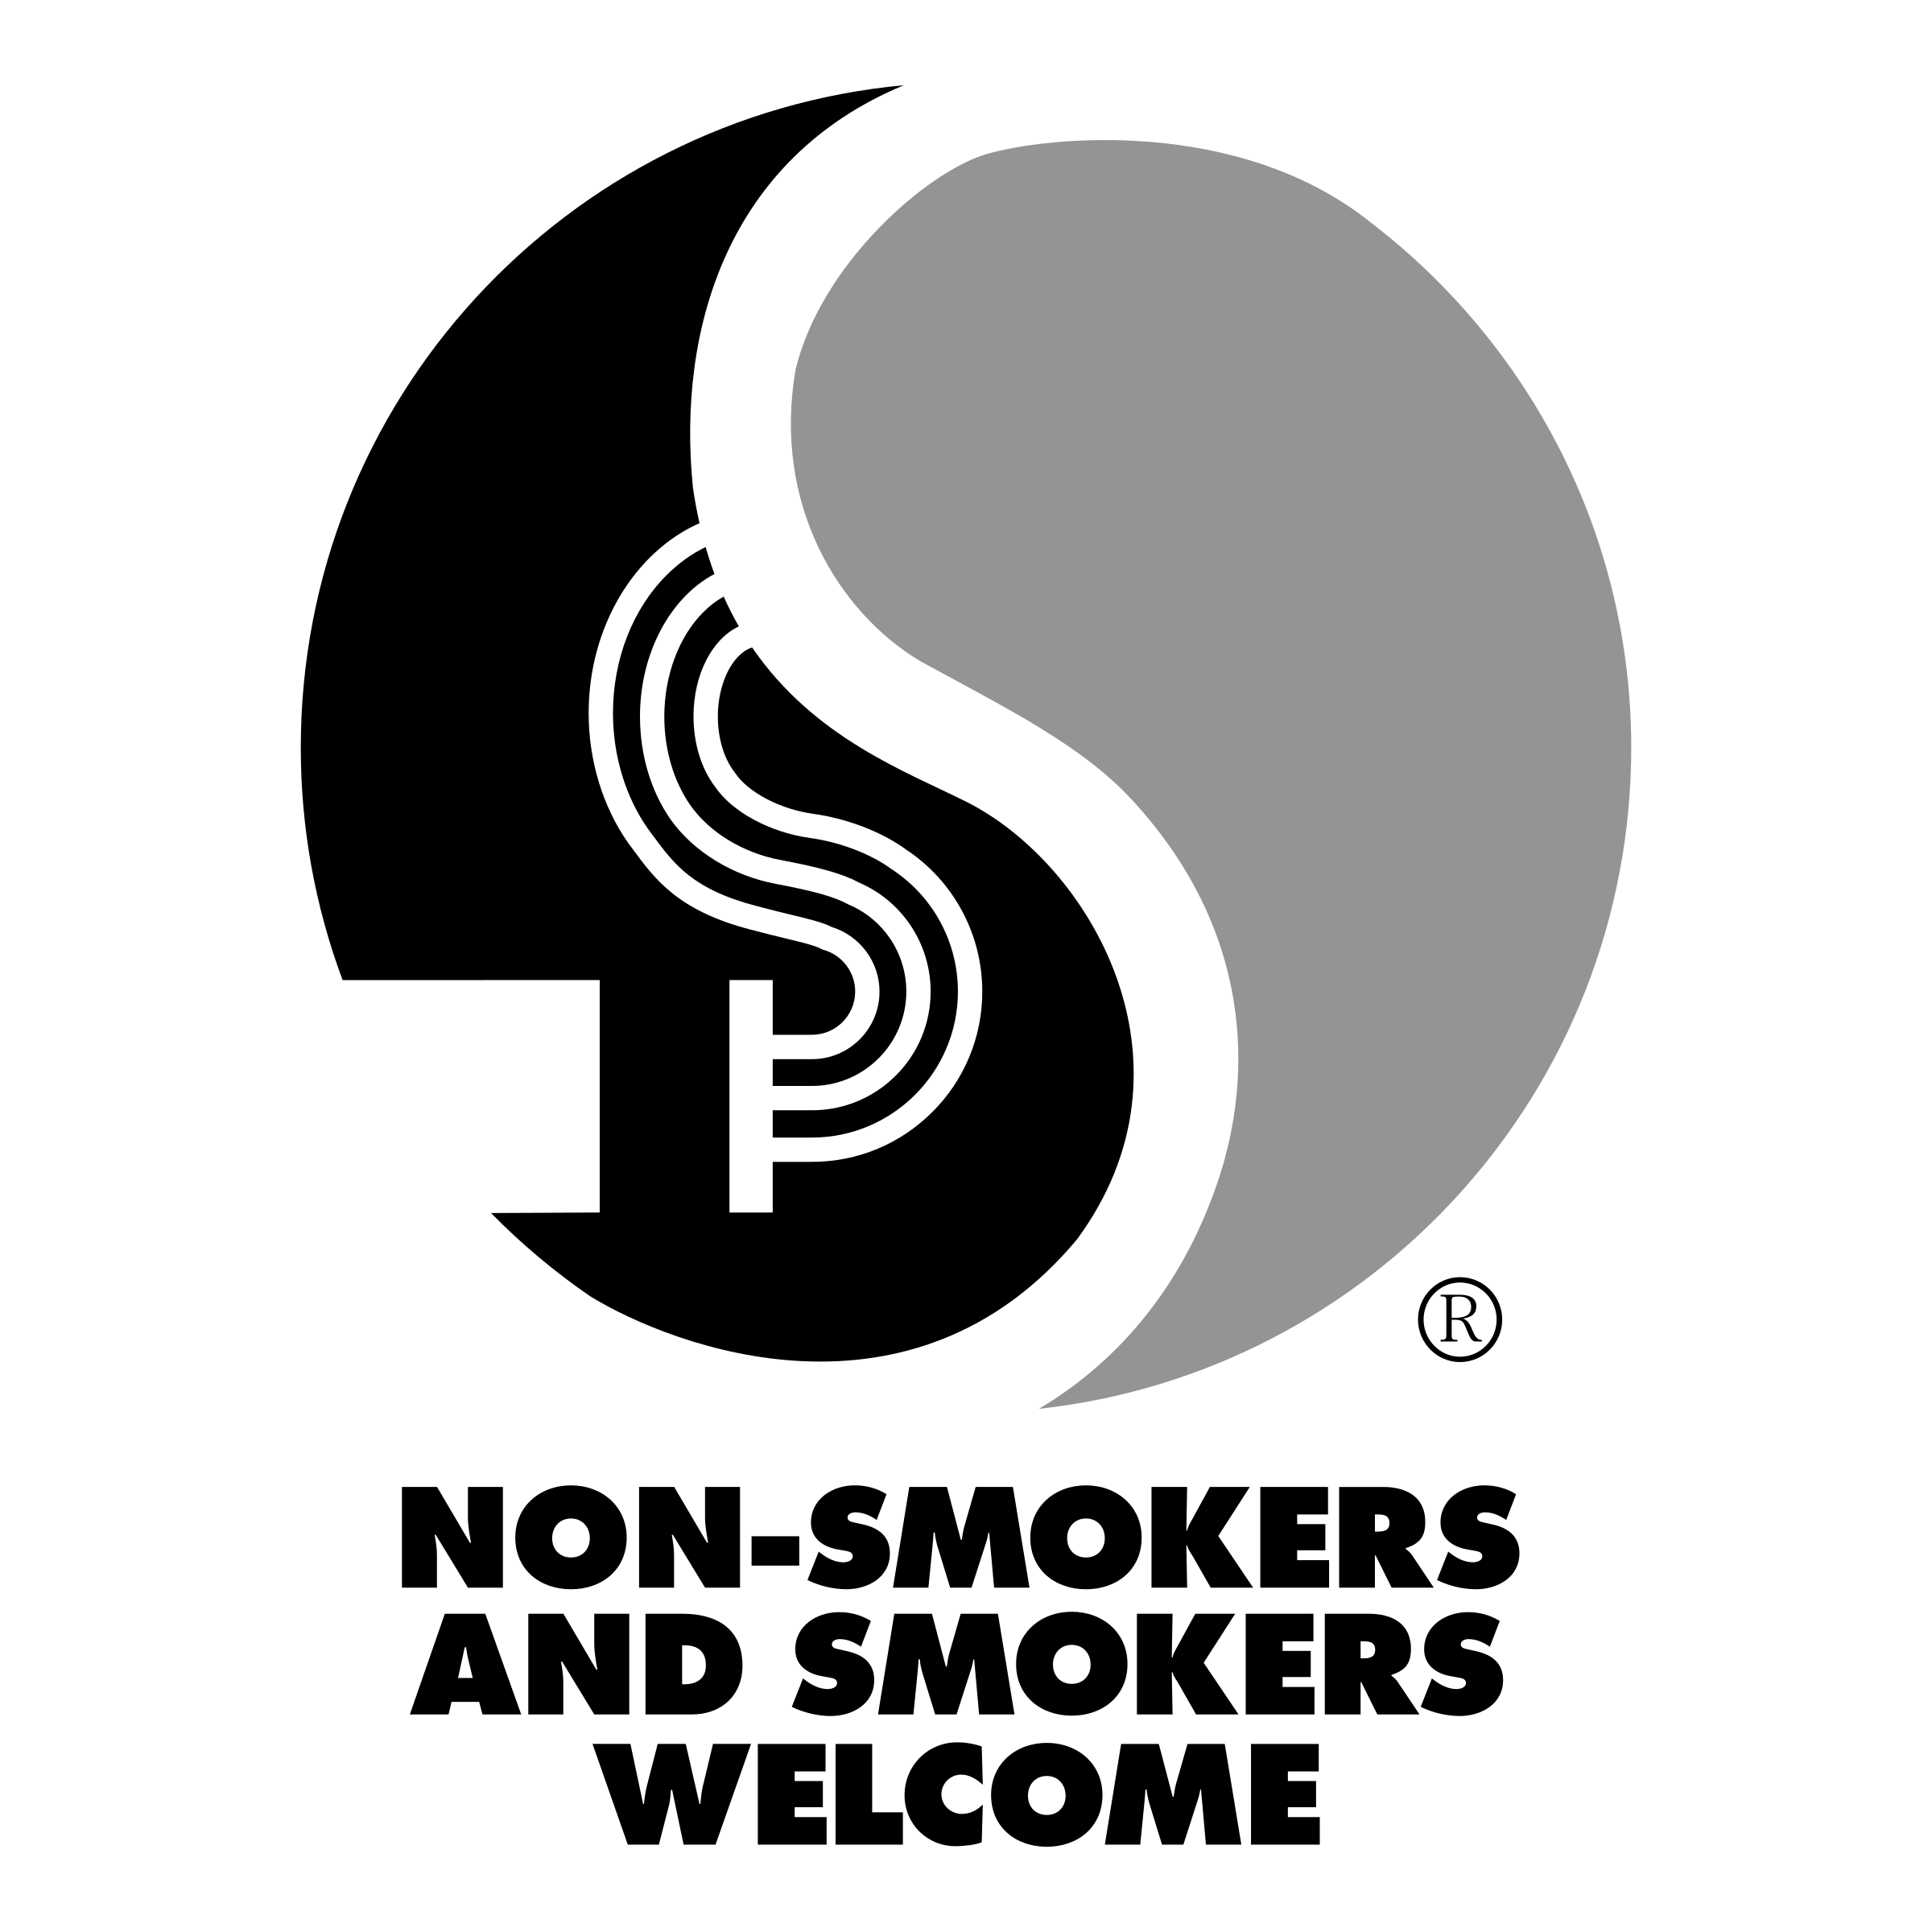 Smokers Logo - Non smokers and smokers welcome Logo PNG Transparent & SVG Vector